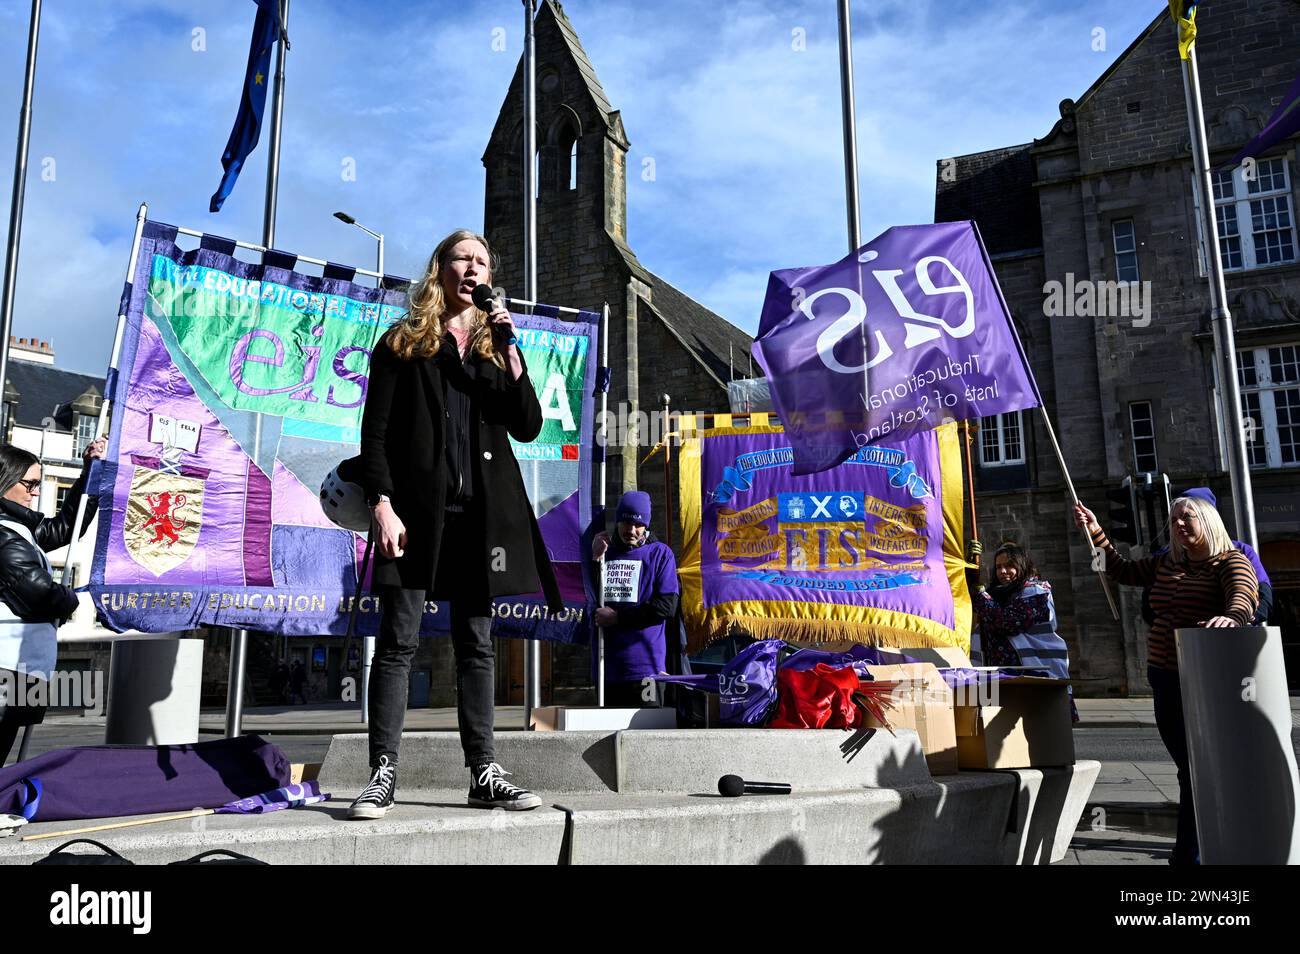 Edinburgh, Scotland, UK. 29th February 2024.  Rally by EIS FELA and Unison protesting against the planned funding cuts to further education and for a fair pay rise, protest at the Scottish parliament Holyrood. President of NUS Scotland, Activist and Scottish Greens campaign manager Ellie Gomersall addressing the crowd. Credit: Craig Brown/Alamy Live News Stock Photo